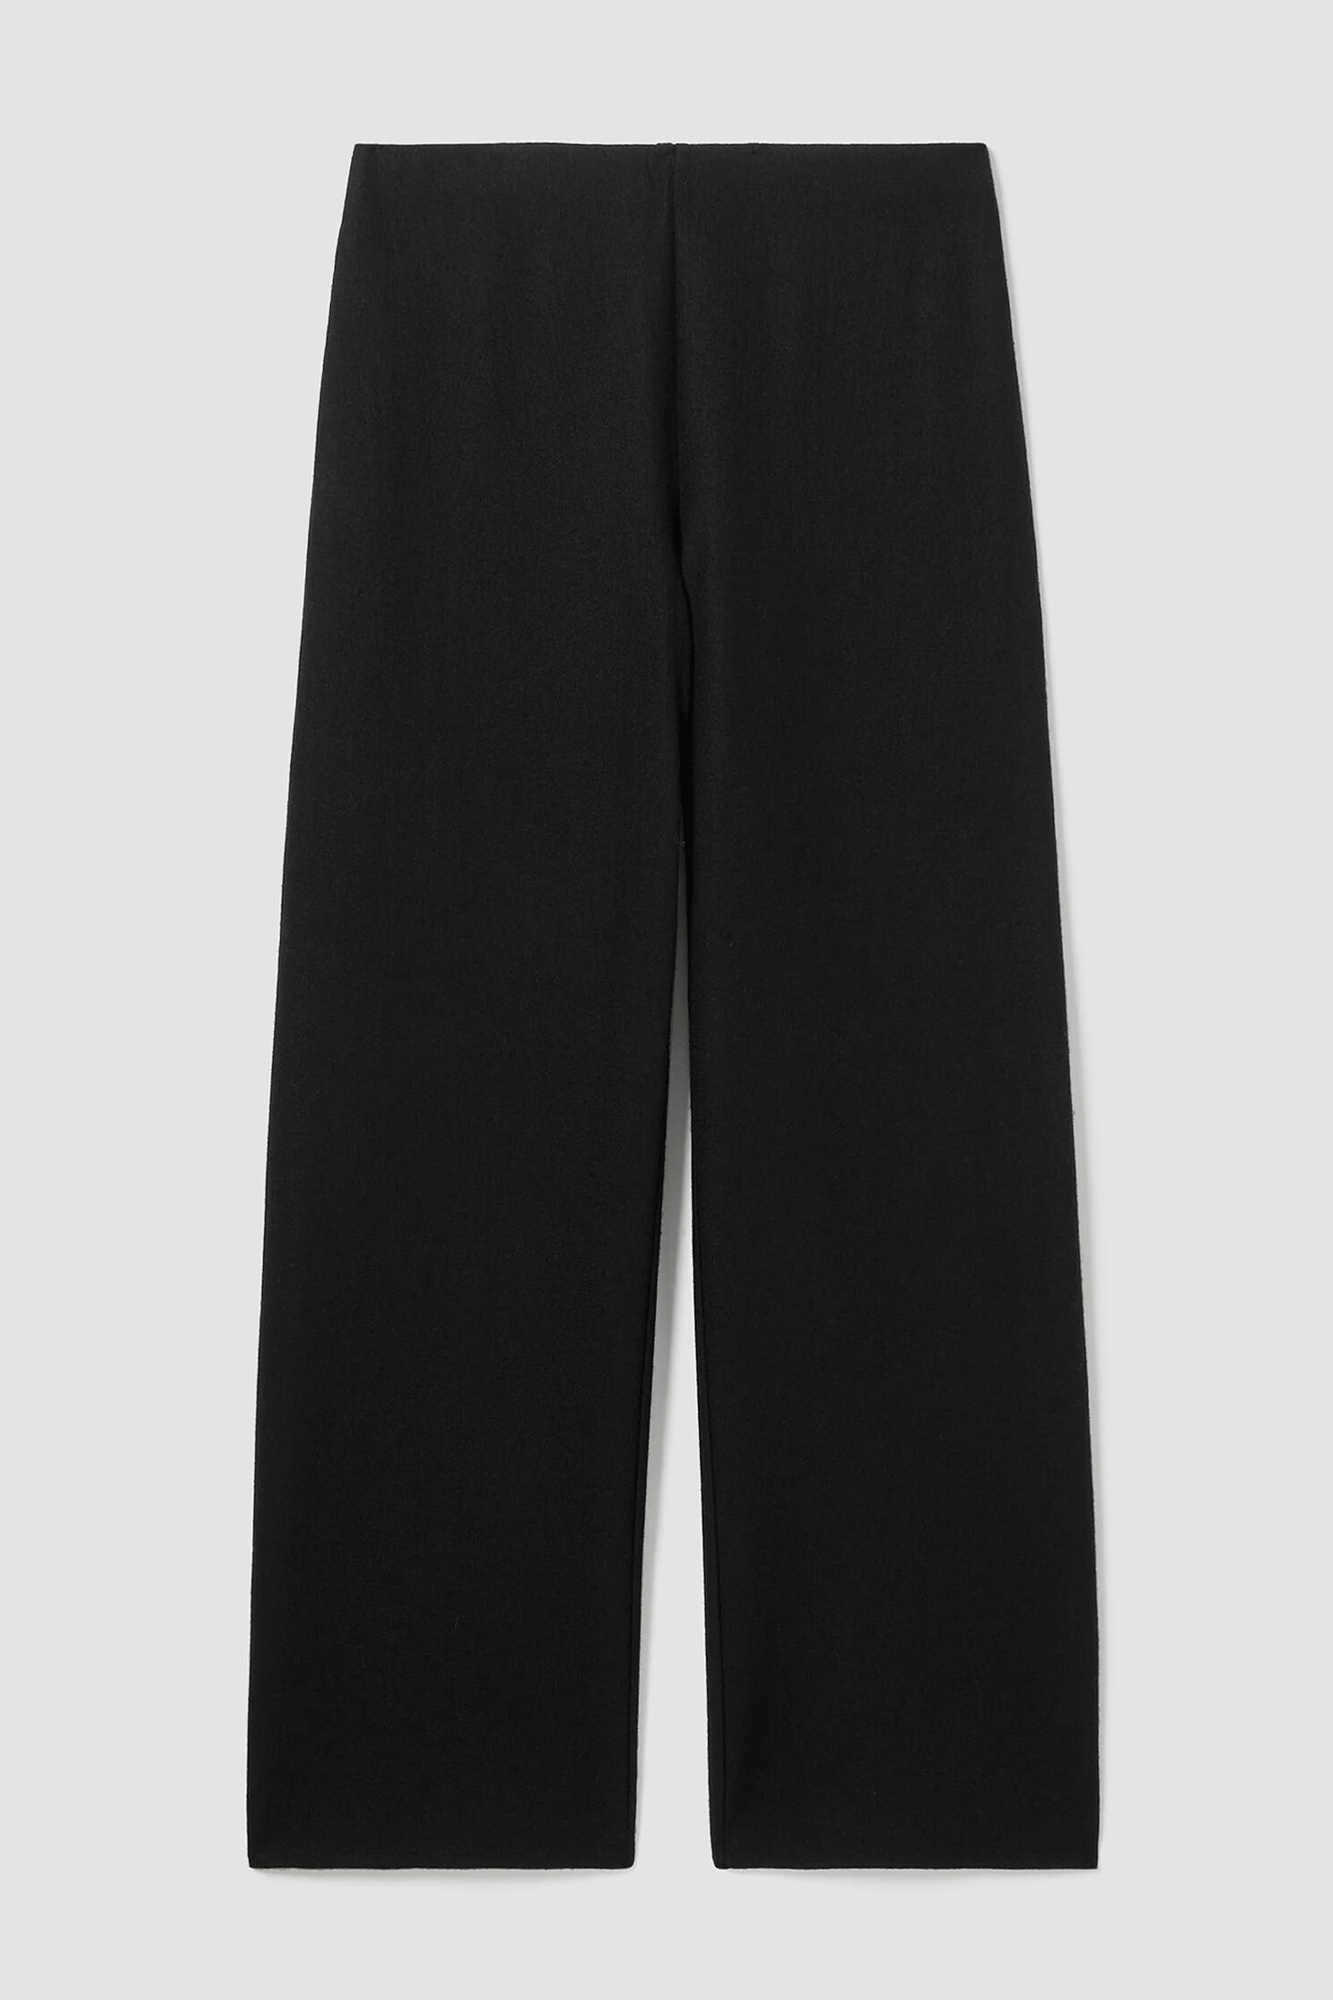 Our High Waist Straight FL Pant from Eileen Fisher offer a strong, yet comfortable fit, made from our midweight boiled wool knit fabric. These pants feature clean lines, an easy drape, and a straight silhouette, perfect for any occasion.